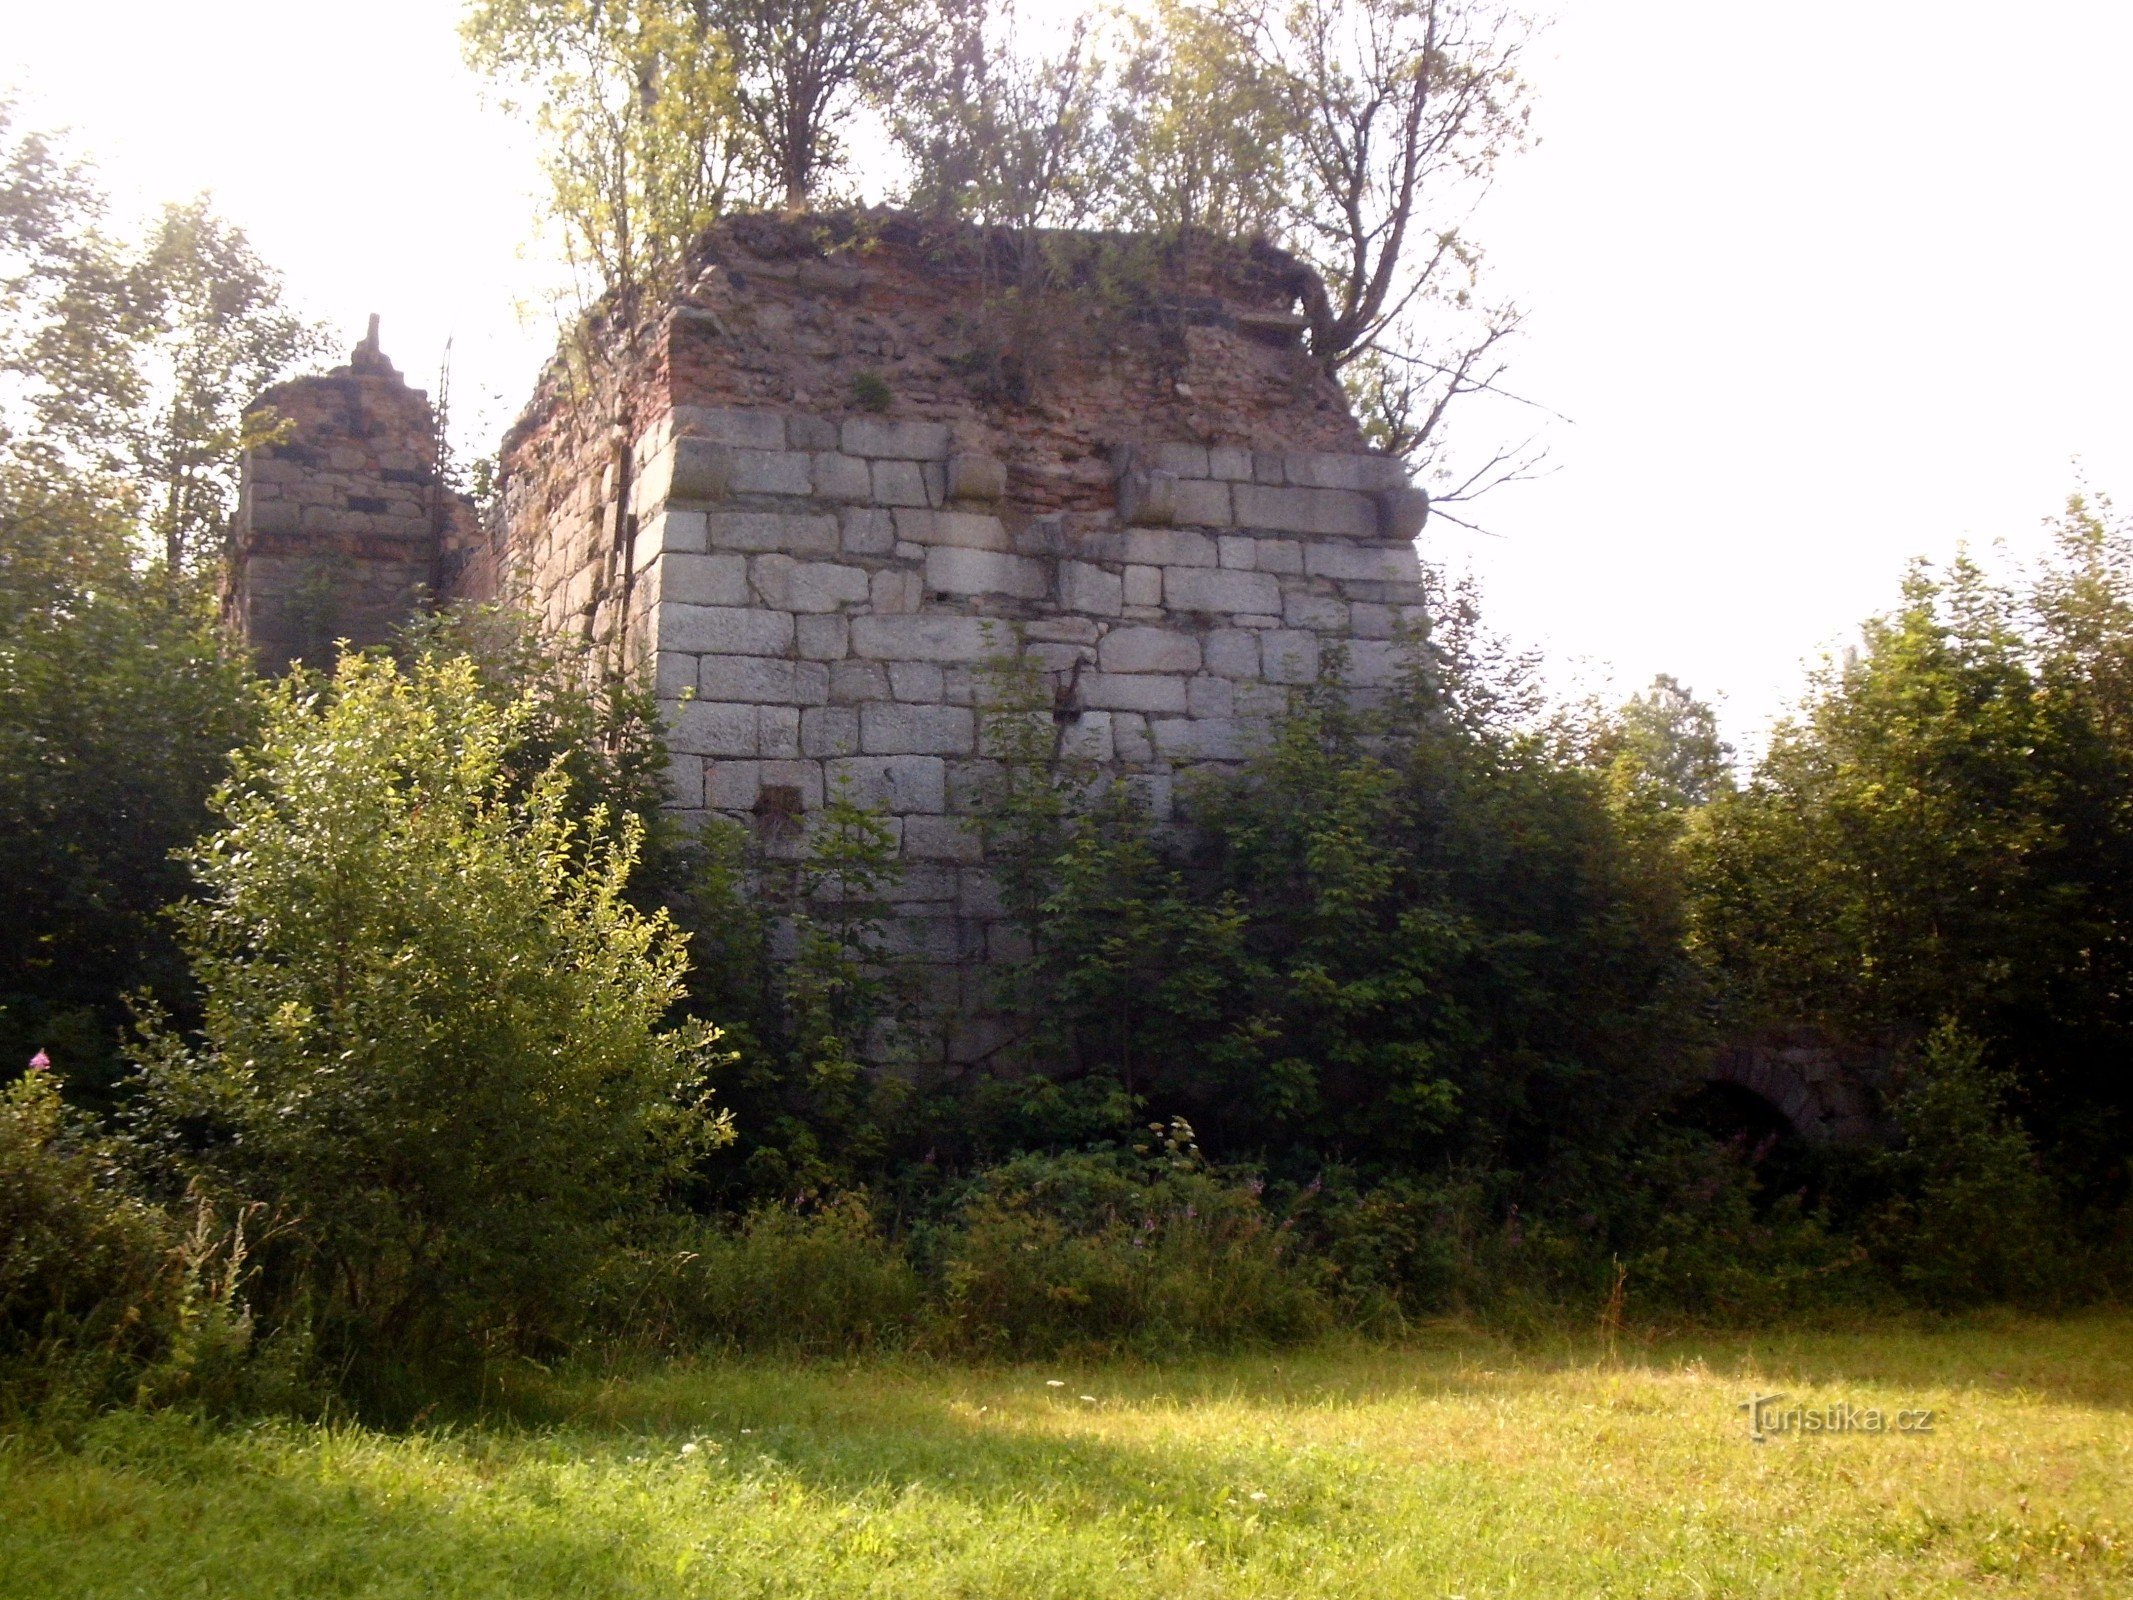 The former High Furnace